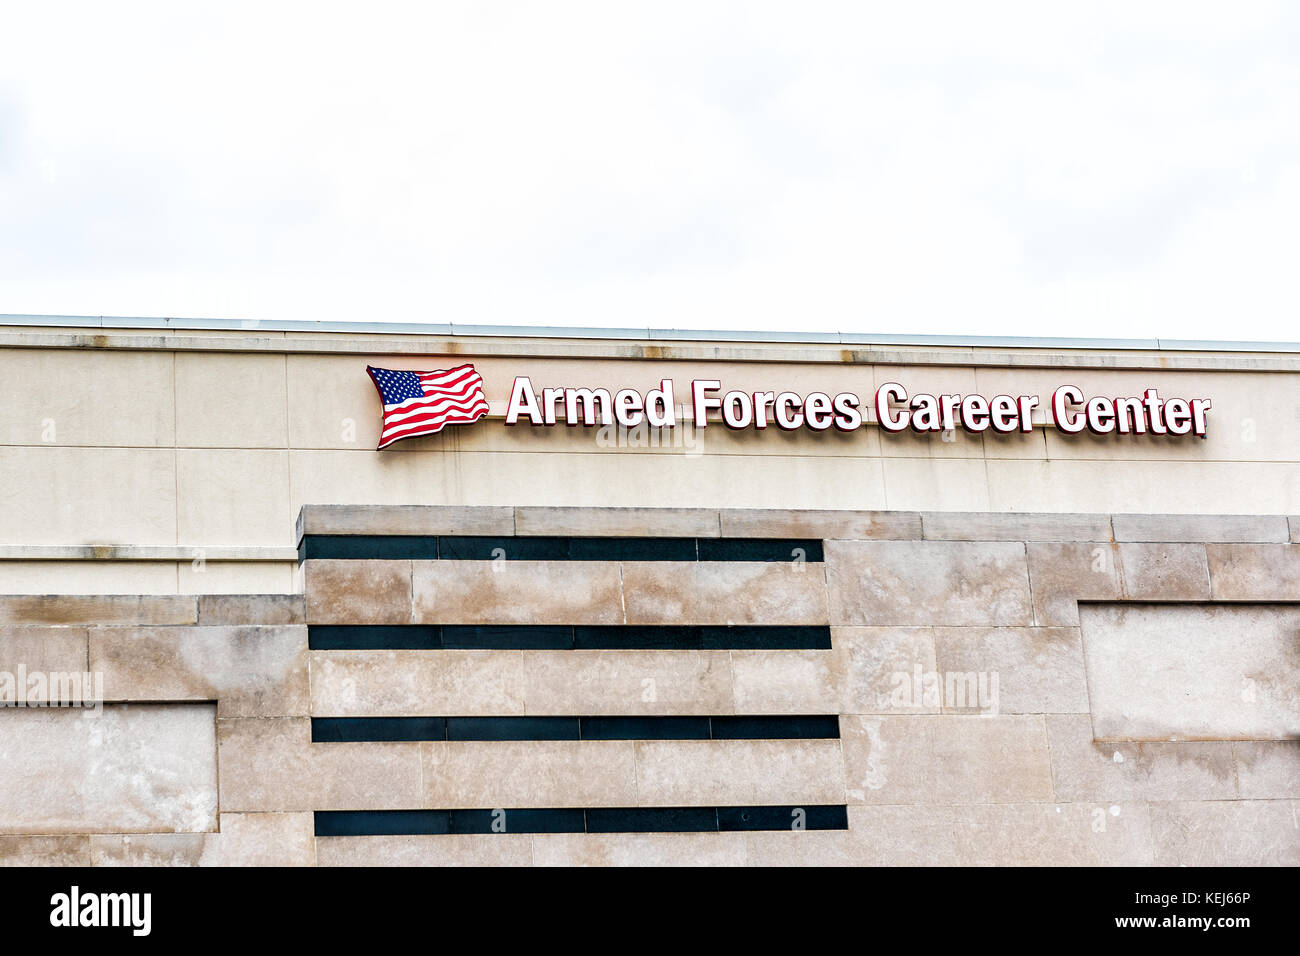 Silver Spring, USA - September 16, 2017: Downtown area of city in Maryland with closeup of Armed Forces Career center sign Stock Photo